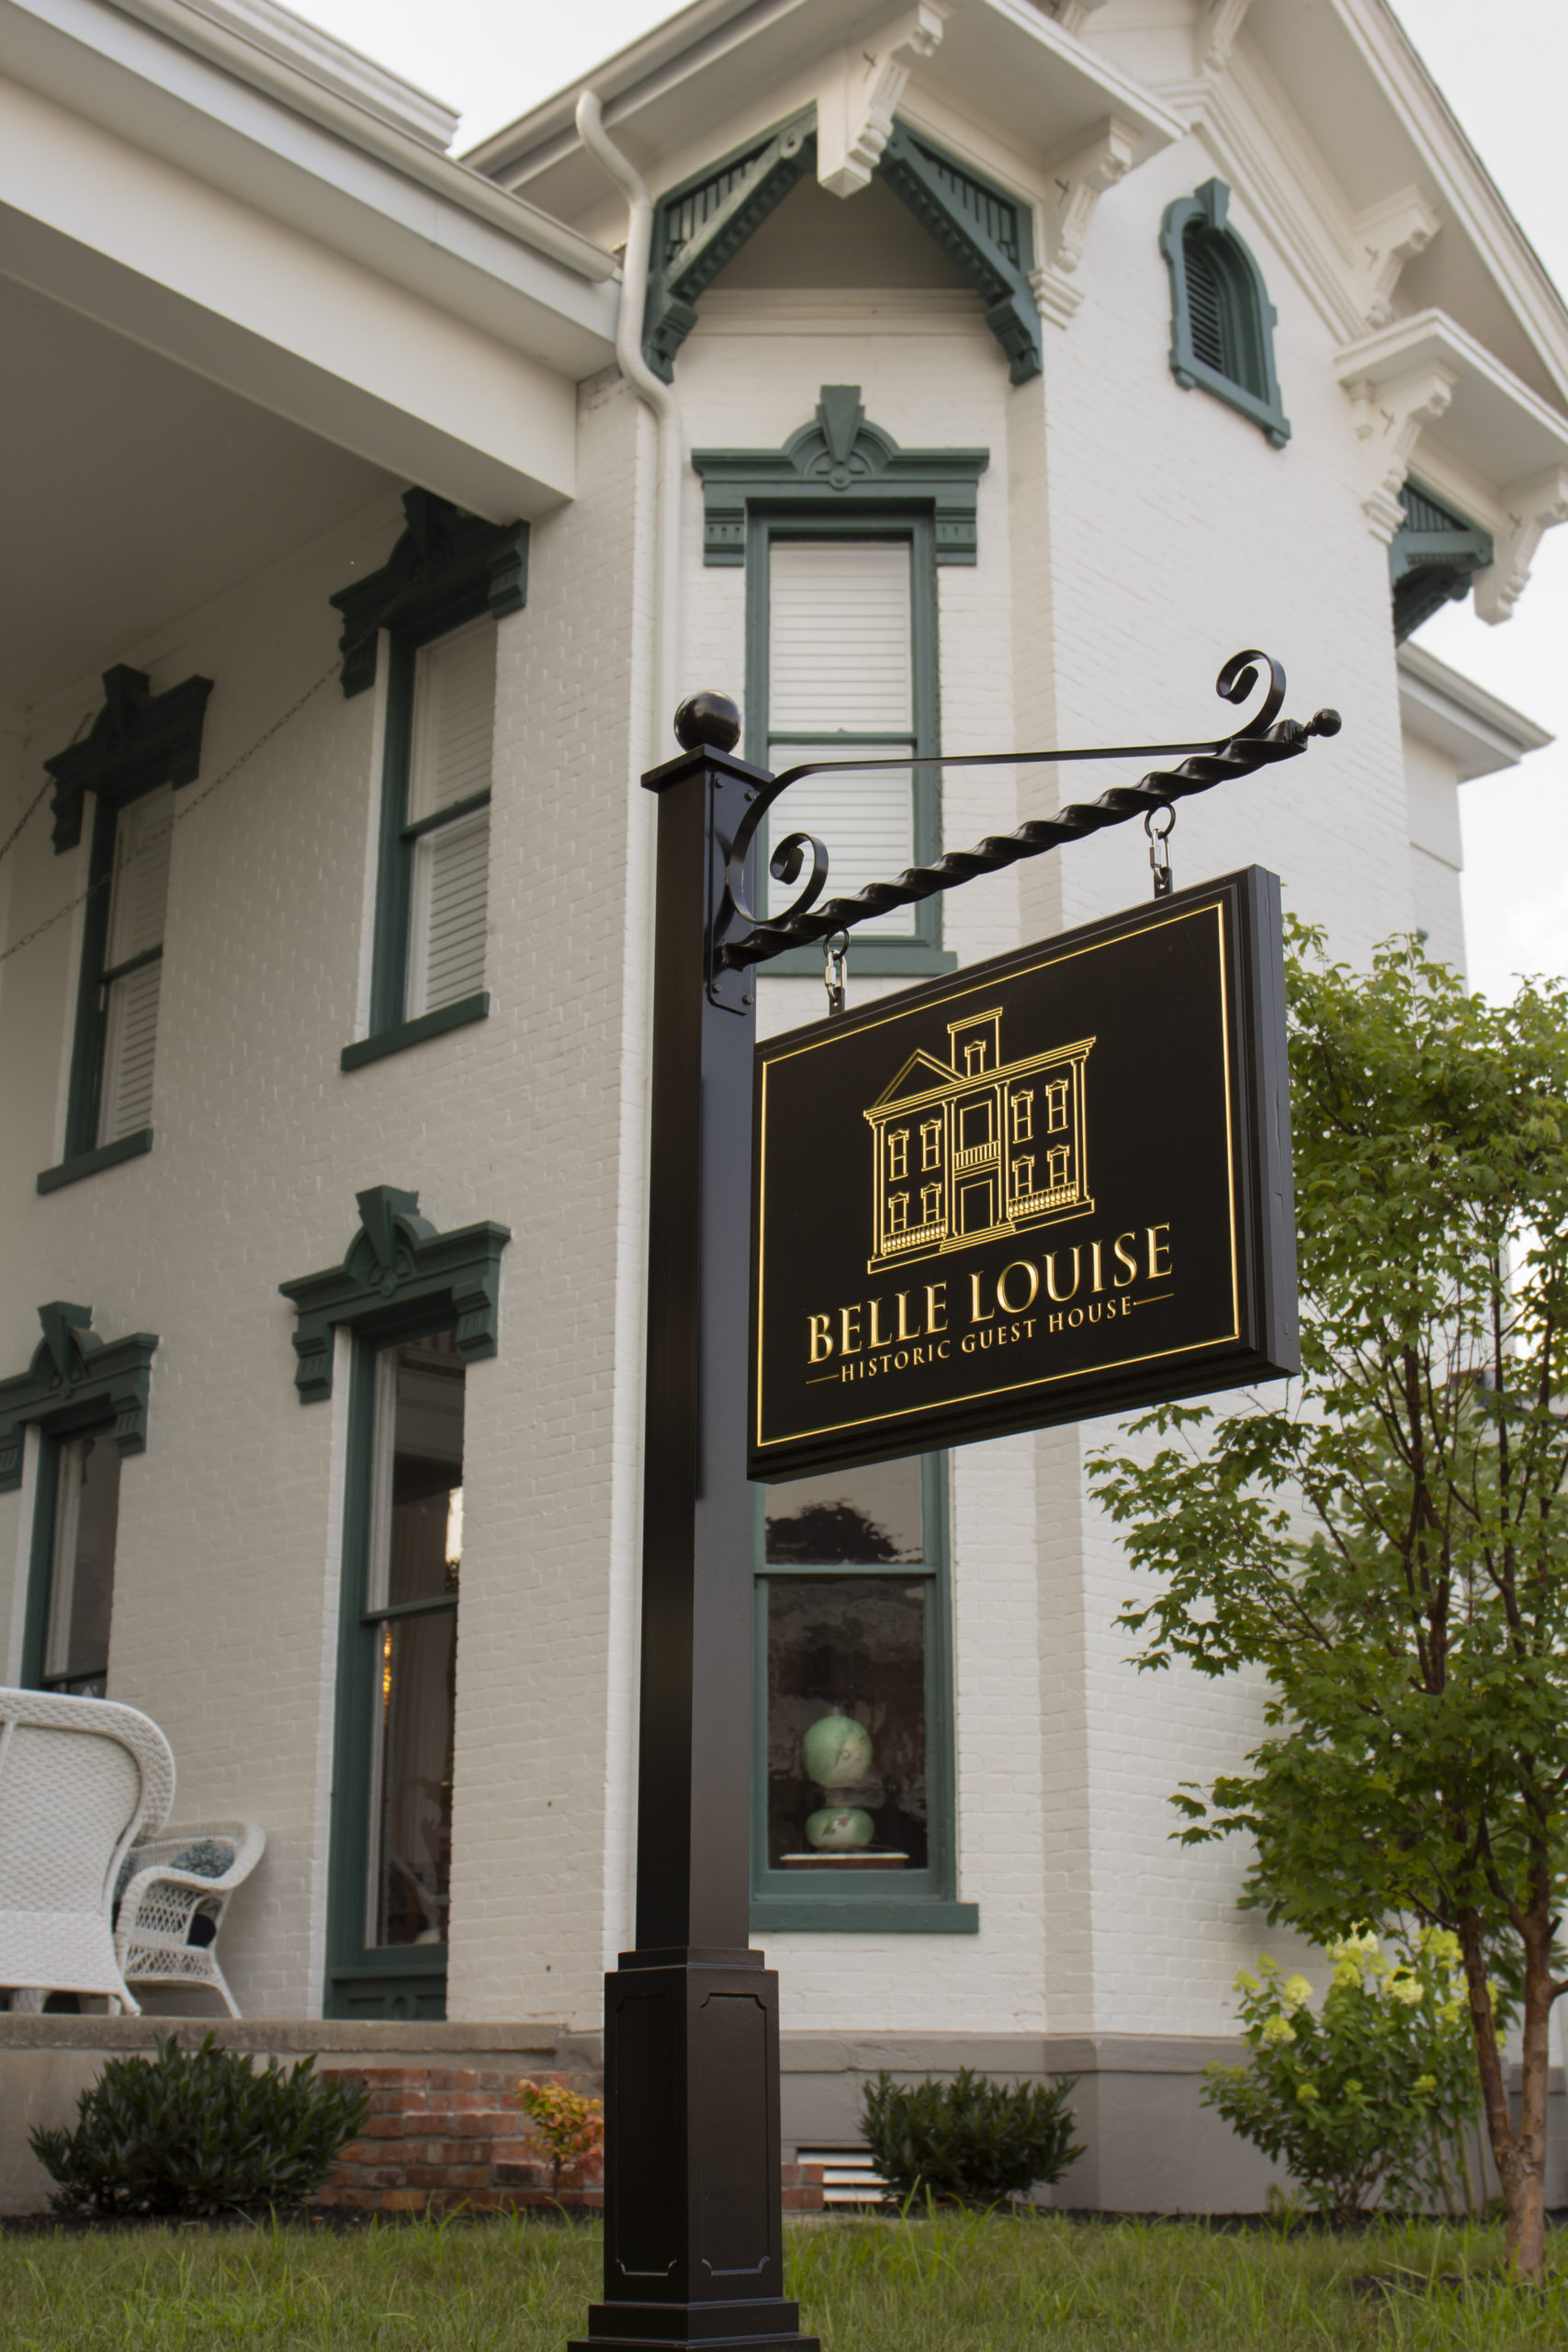 The Historic Belle Louise Bed & Breakfast Paducah, KY